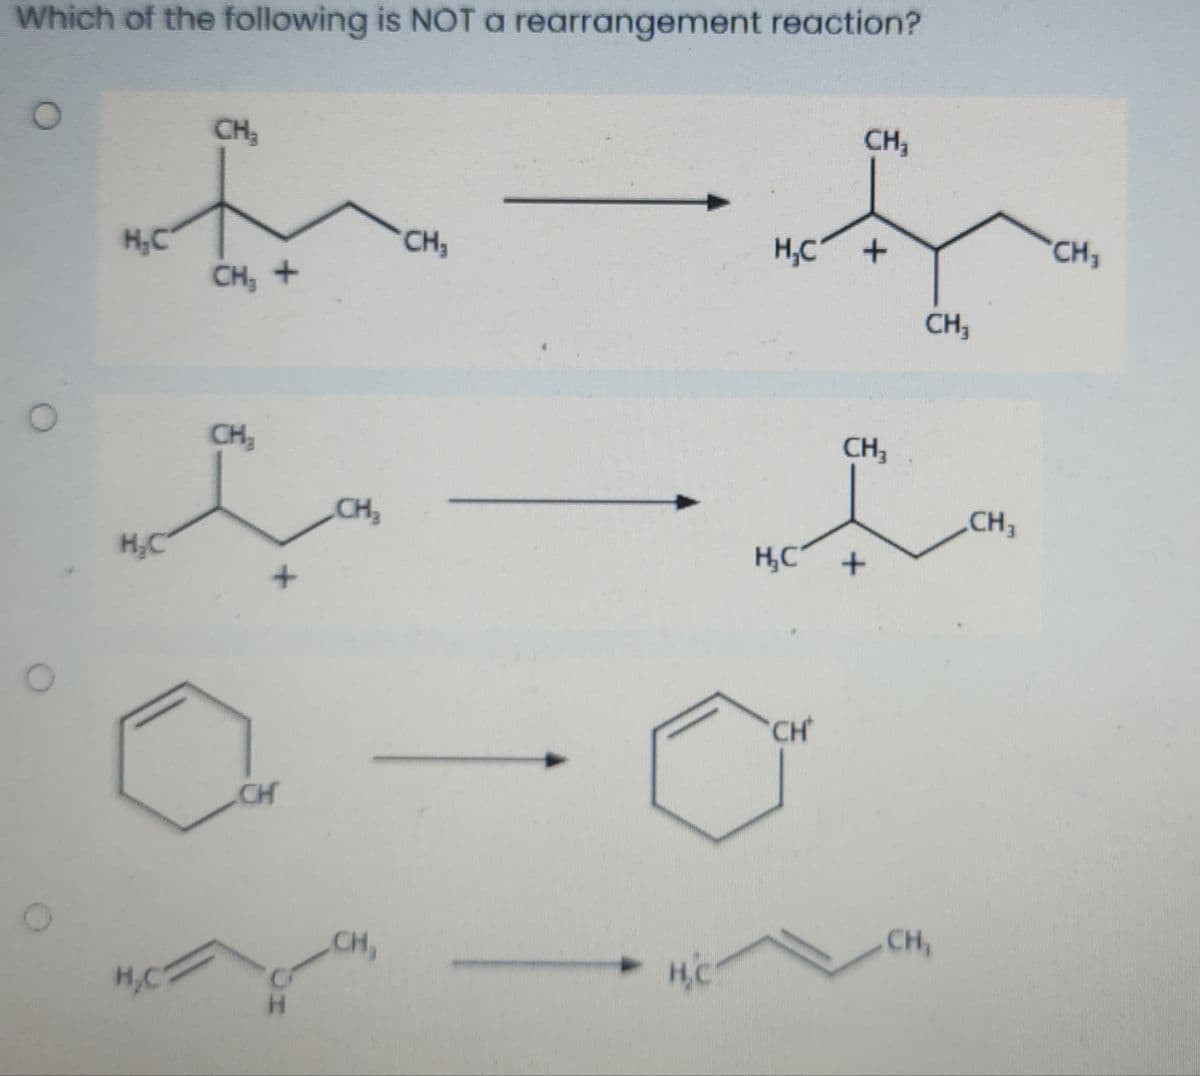 Which of the following is NOT a rearrangement reaction?
CH,
CH,
H,C
CH, +
CH3
H,C
CH3
CH,
CH,
CH,
CH,
CH,
H,C
H,C +
CH
CH
CH,
CH,
H,C
H.
